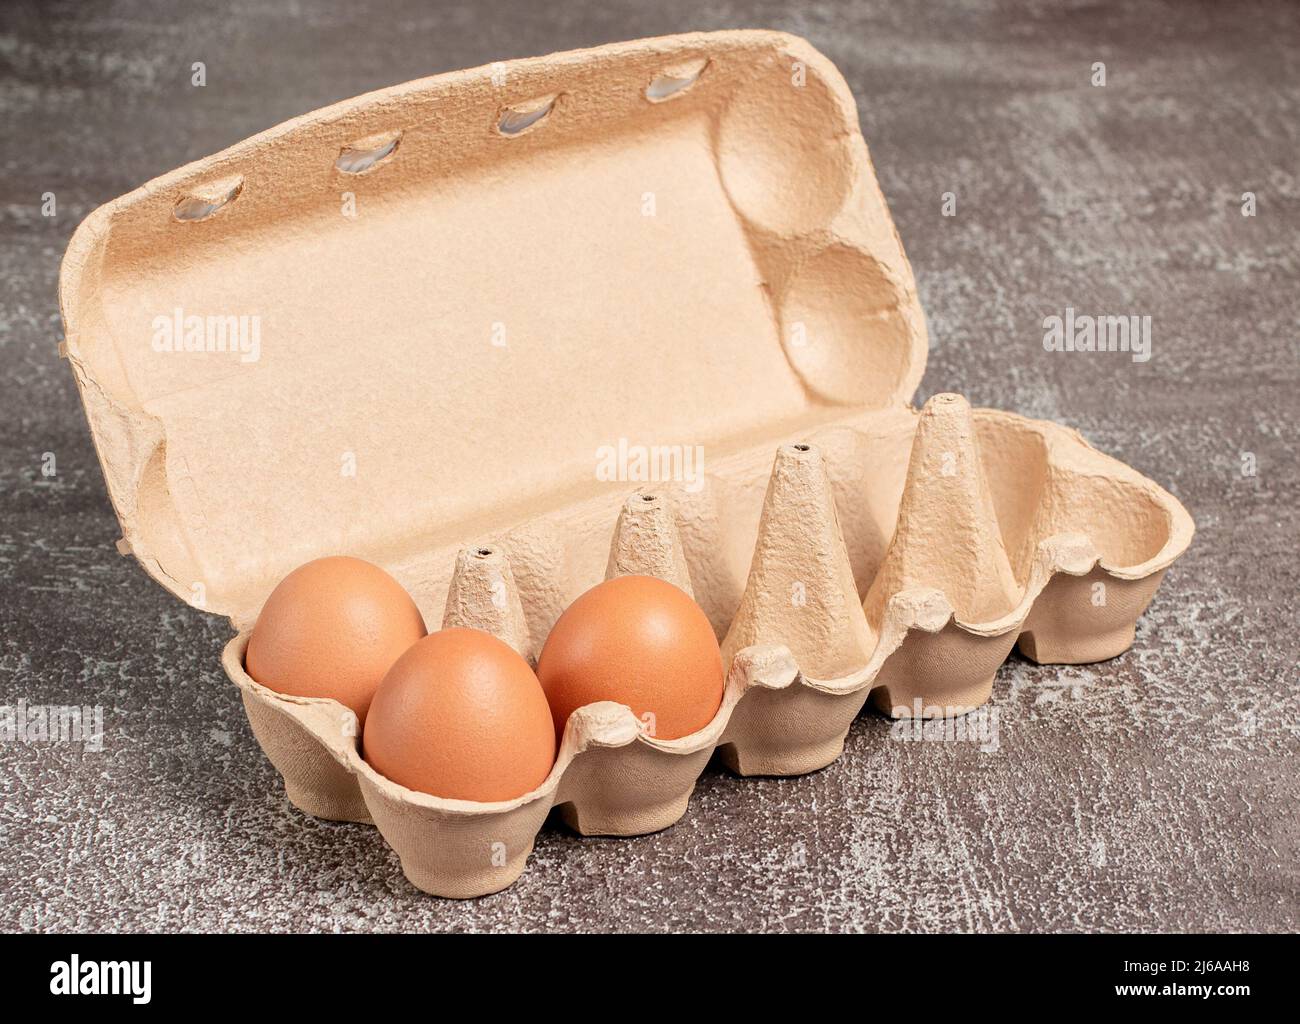 Fresh organic chicken eggs in open carton pack or egg container on brown background, set, stock photo Stock Photo